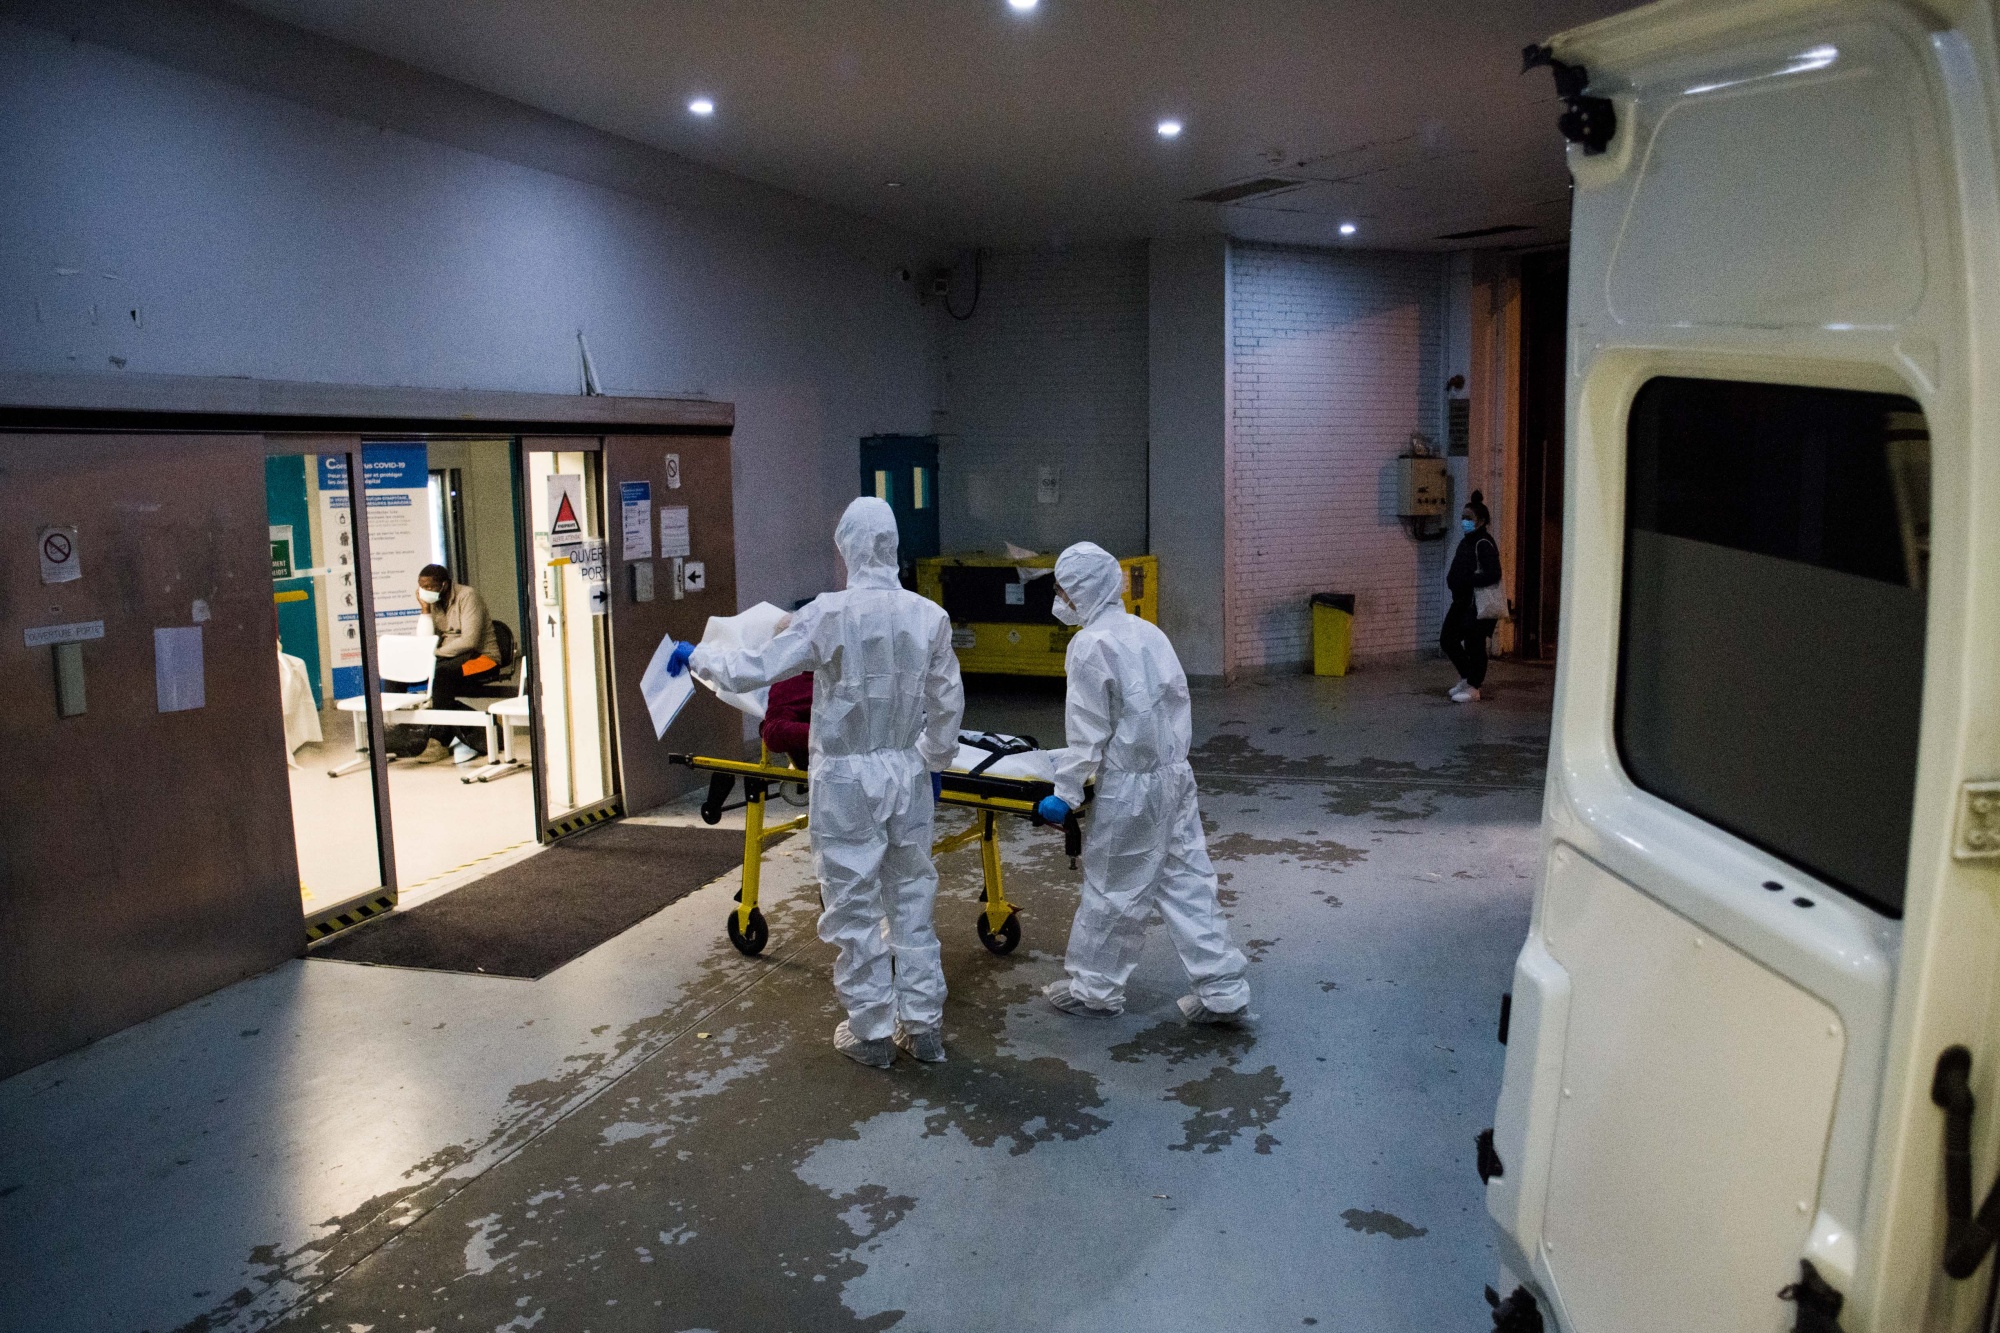 An ambulance crew transports a patient to a hospital in Paris, on Oct. 24.&nbsp;France reported 523 deaths from the disease on Tuesday, the most since April 22.&nbsp;